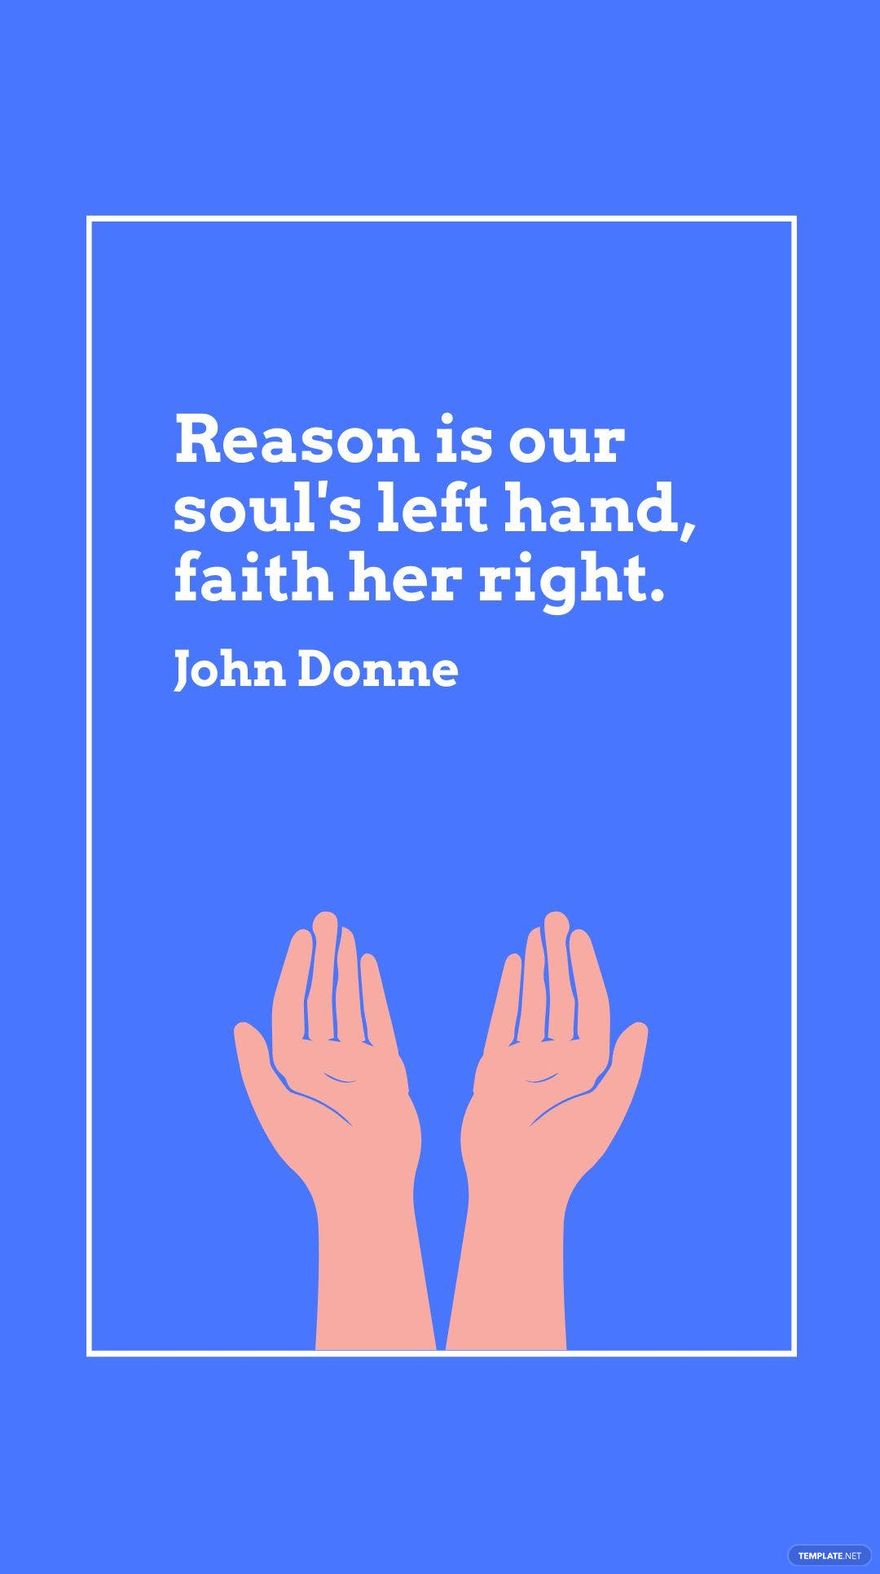 Free John Donne - Reason is our soul's left hand, faith her right. in JPG